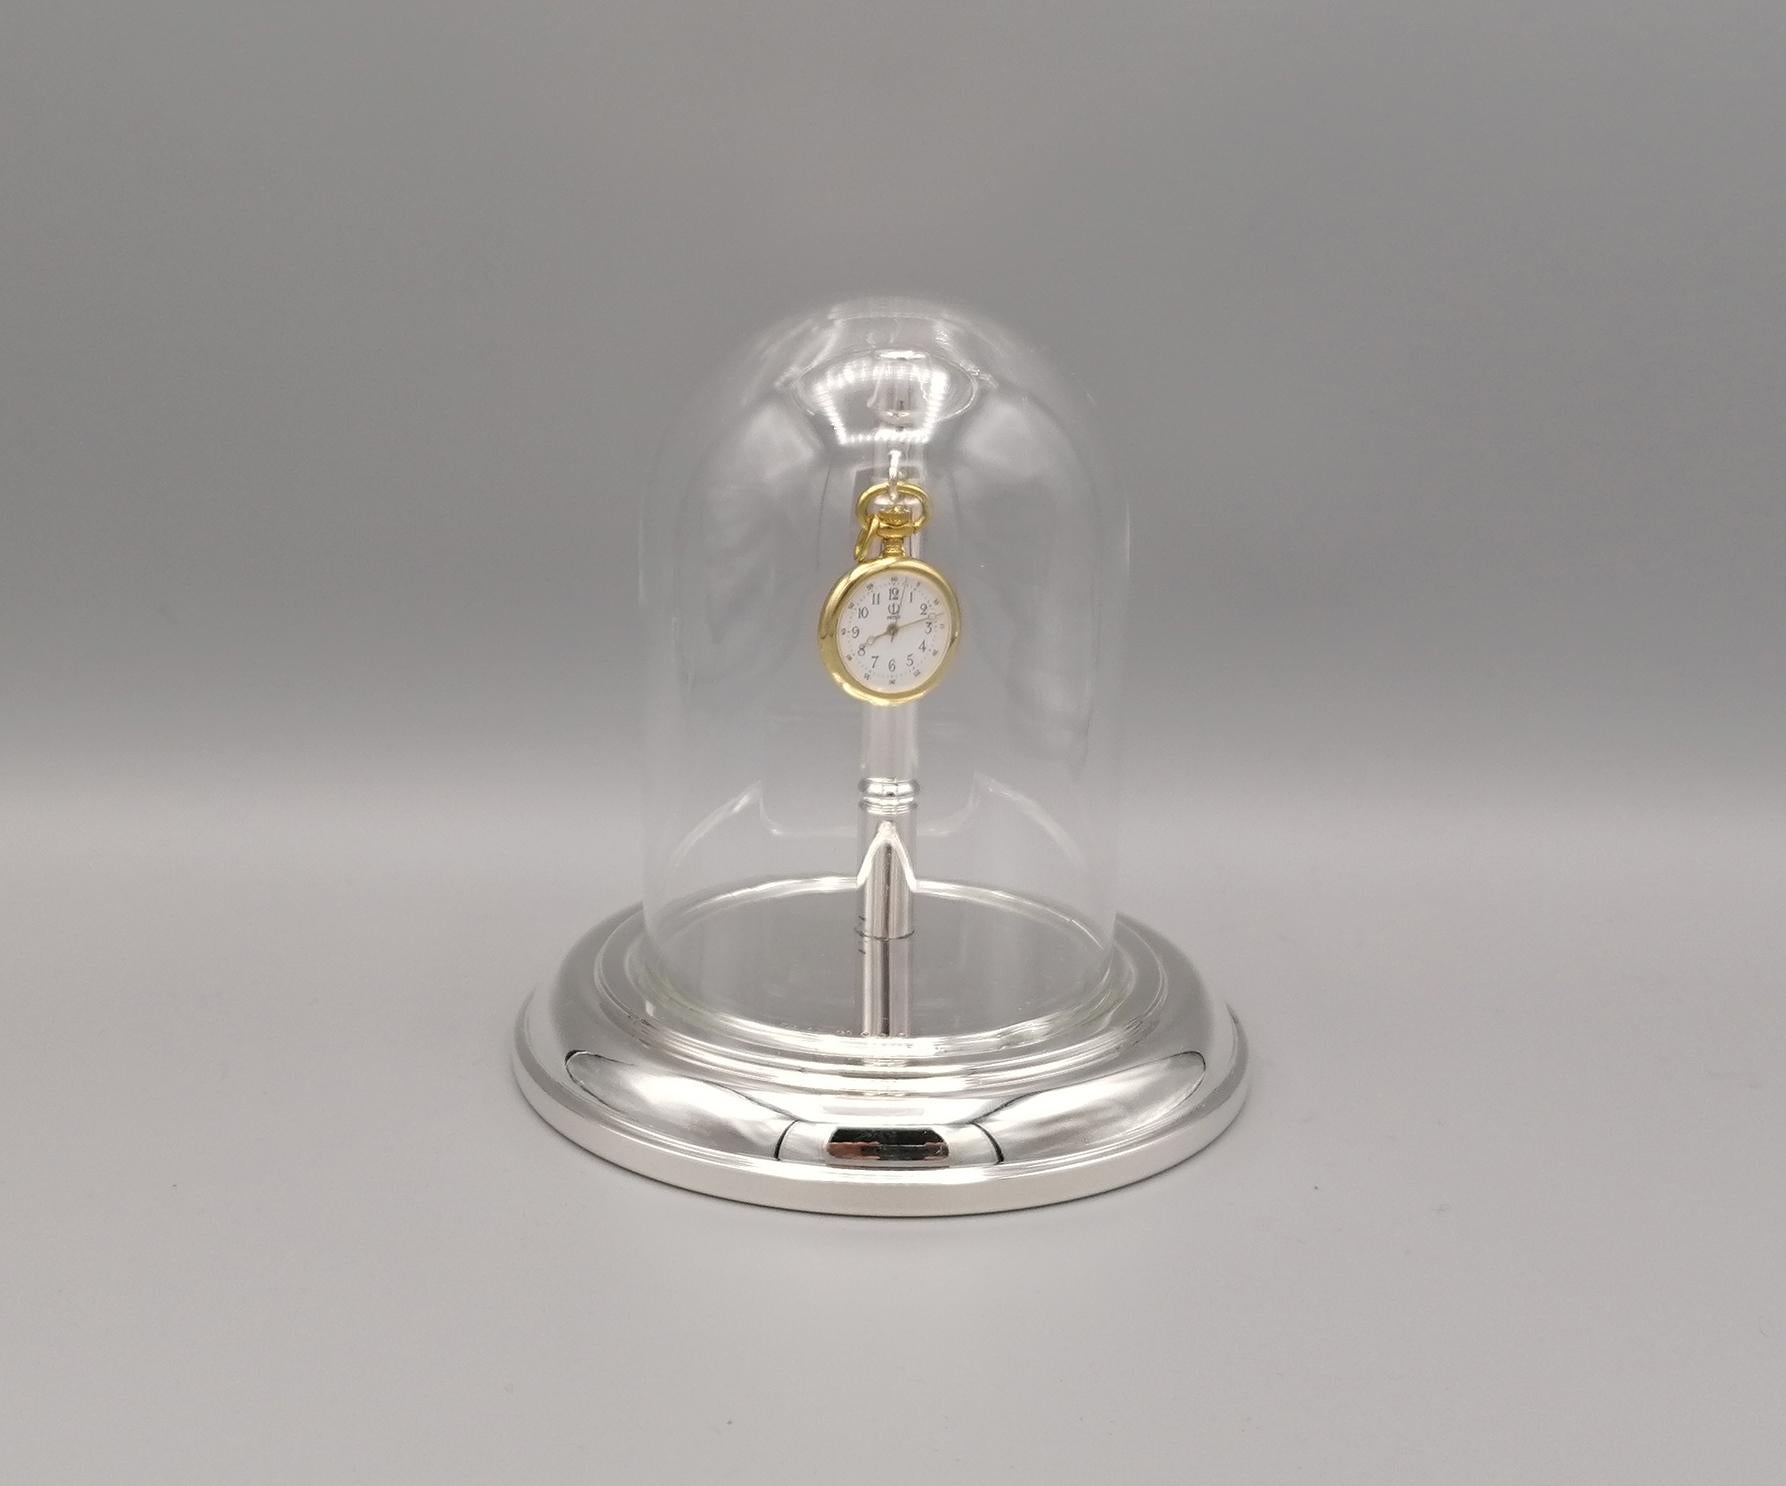 Stand for watch in sterling silver formed by a smooth round base and a rod also in silver, where a hook has been fixed to be able to hang a pocket watch.

The watch is not supplied with the stand.
It was photographed to give an idea of the